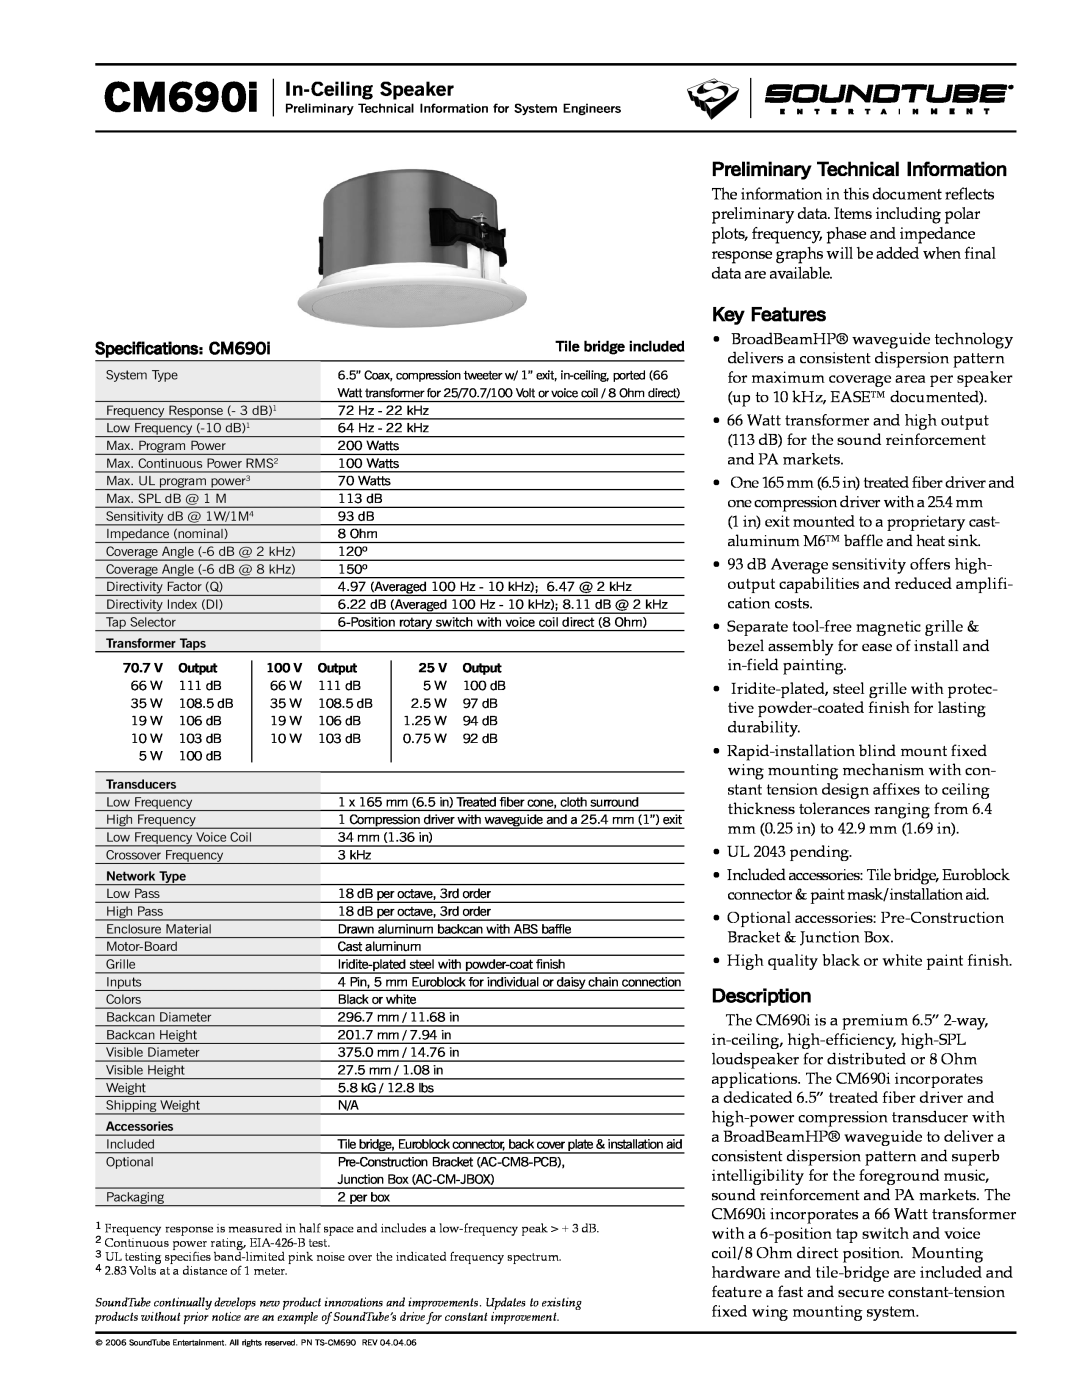 Phase Technology CM690i specifications In-CeilingSpeaker, Preliminary TechnicalInformation, Key Features, Description 